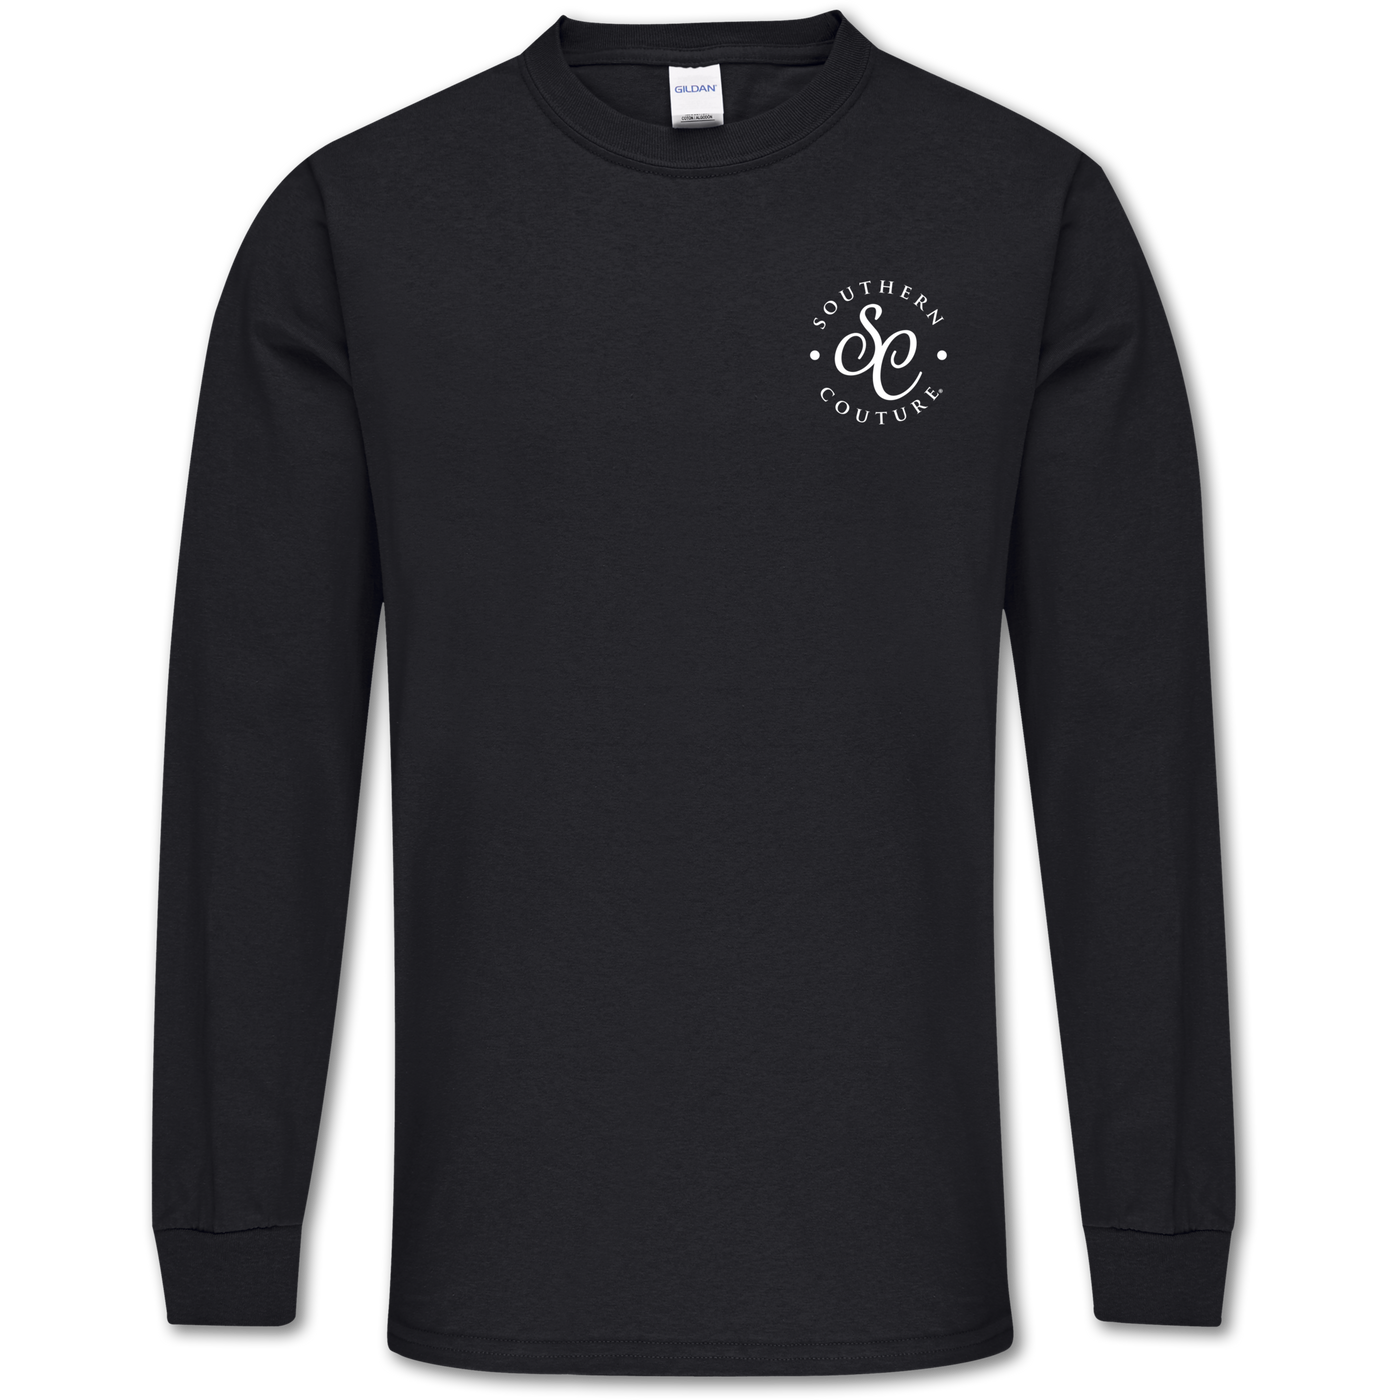 Southern Couture Hocus Pocus Black Long Sleeve